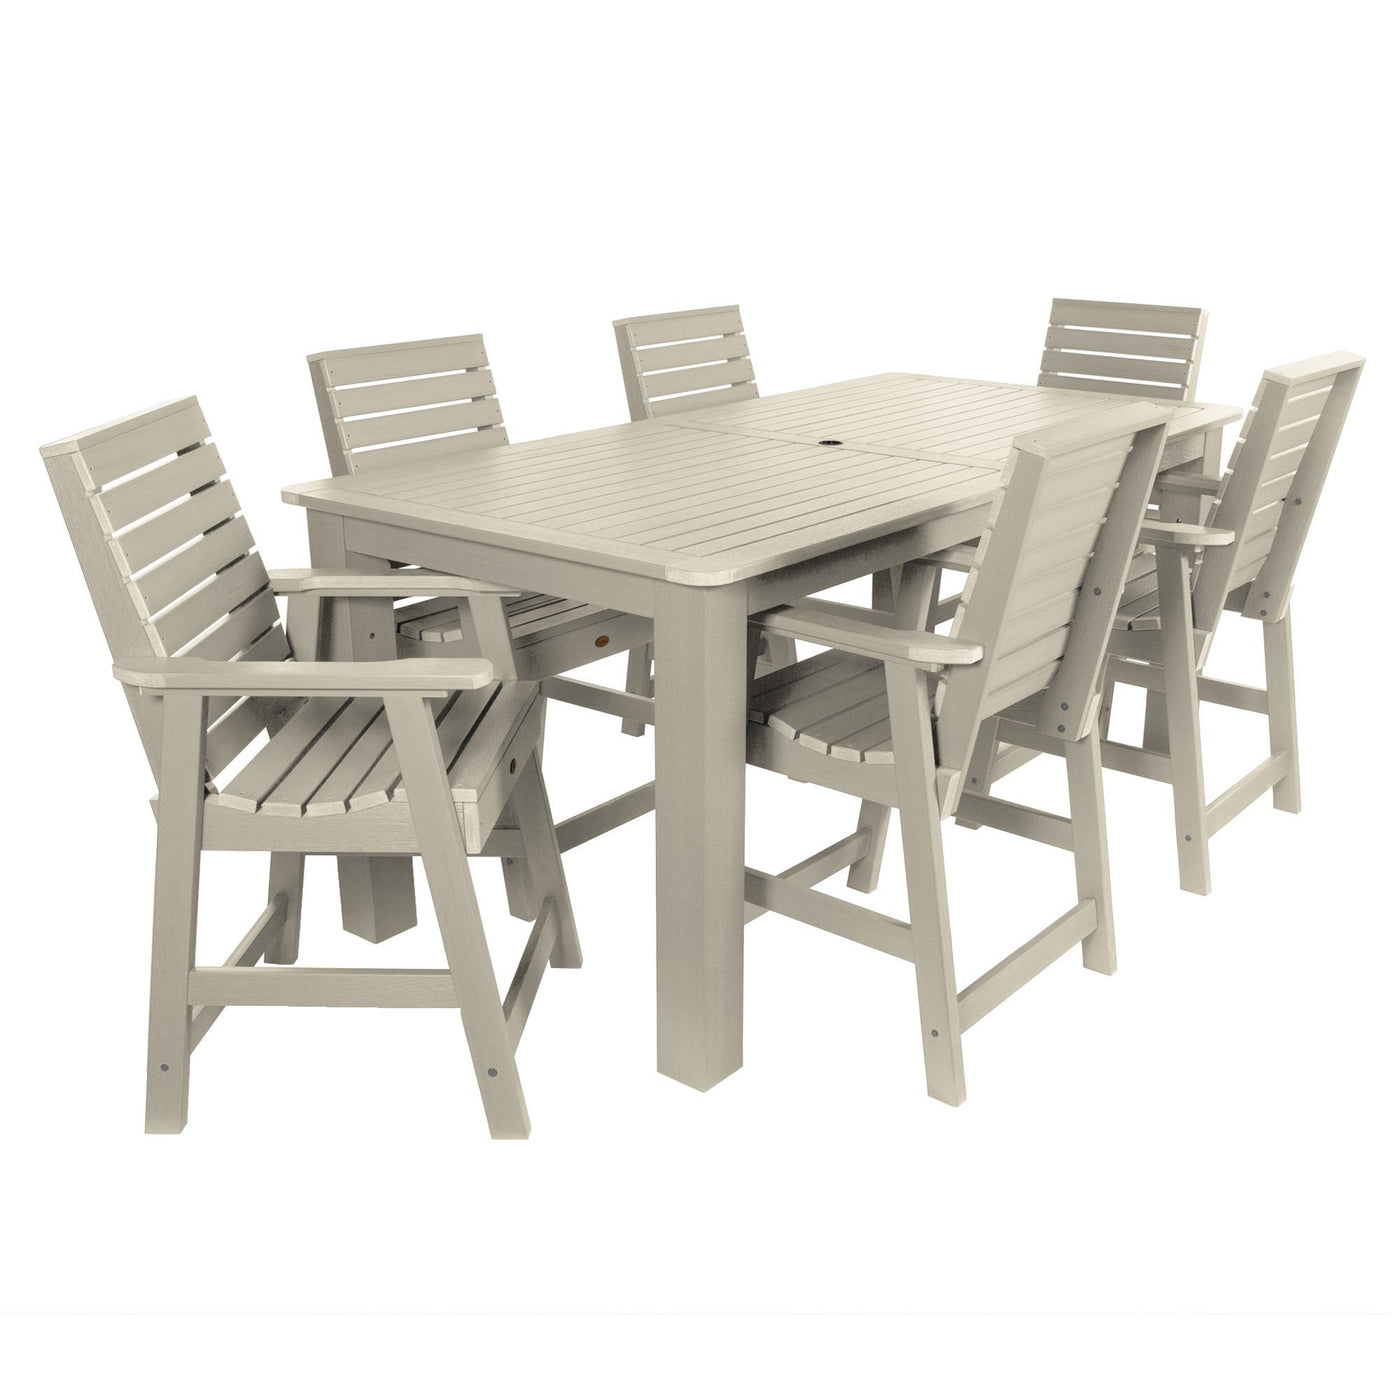 Weatherly 7pc Rectangular Outdoor Dining Set 42in x 84in - Counter Height Dining Highwood USA Whitewash 